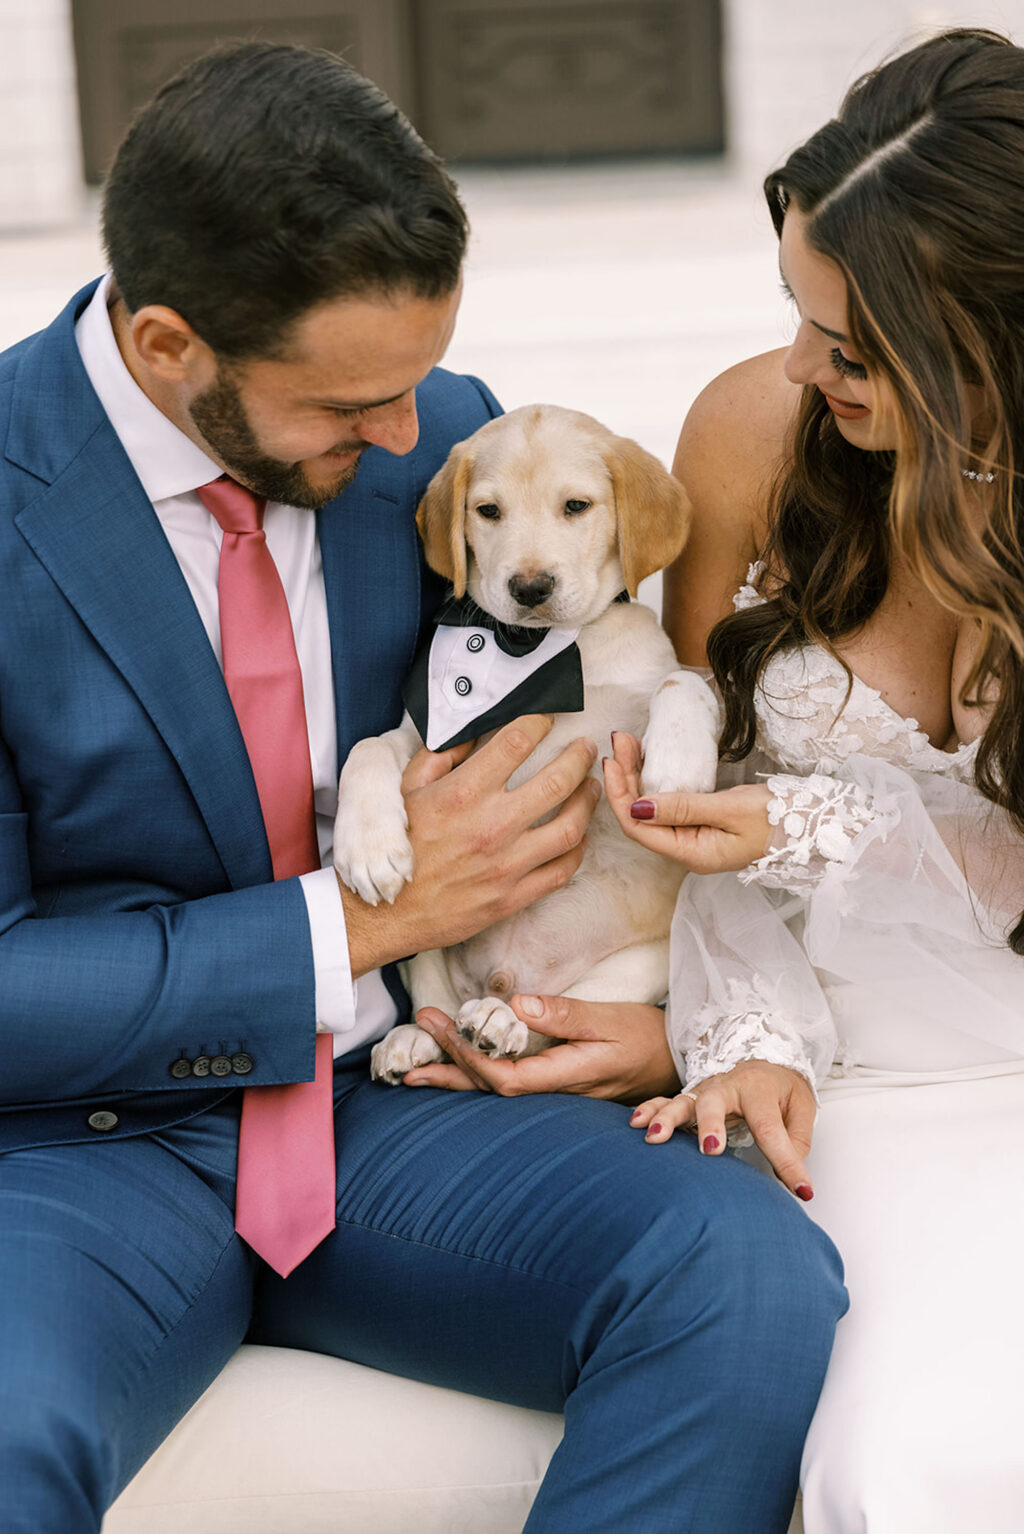 Bride and Groom with Adoptable Puppy Wedding Portrait | Unique Wedding Trends | Tampa Bay Fairytail Pet Care